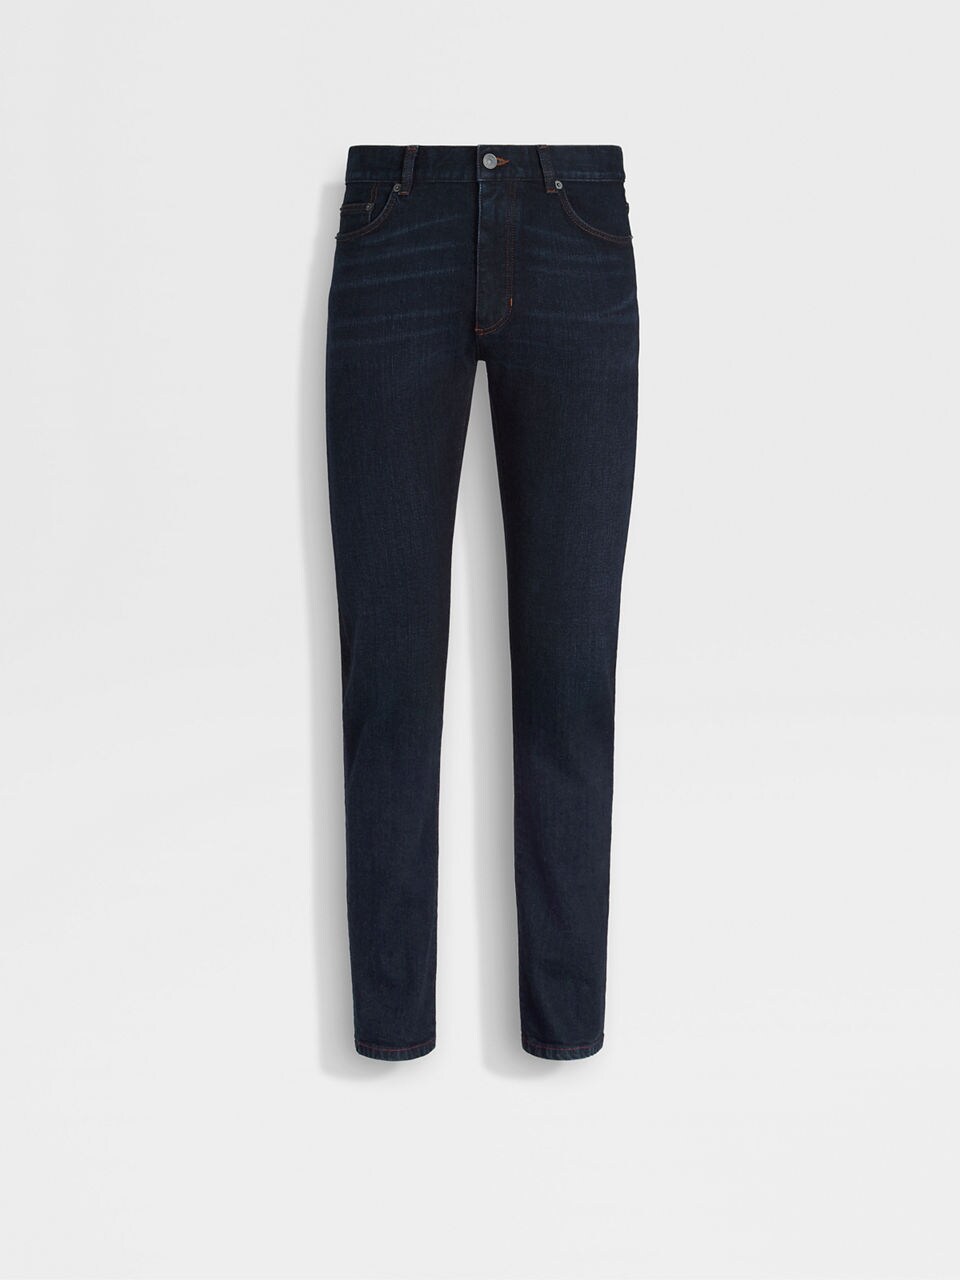 Zegna jeans in cotton